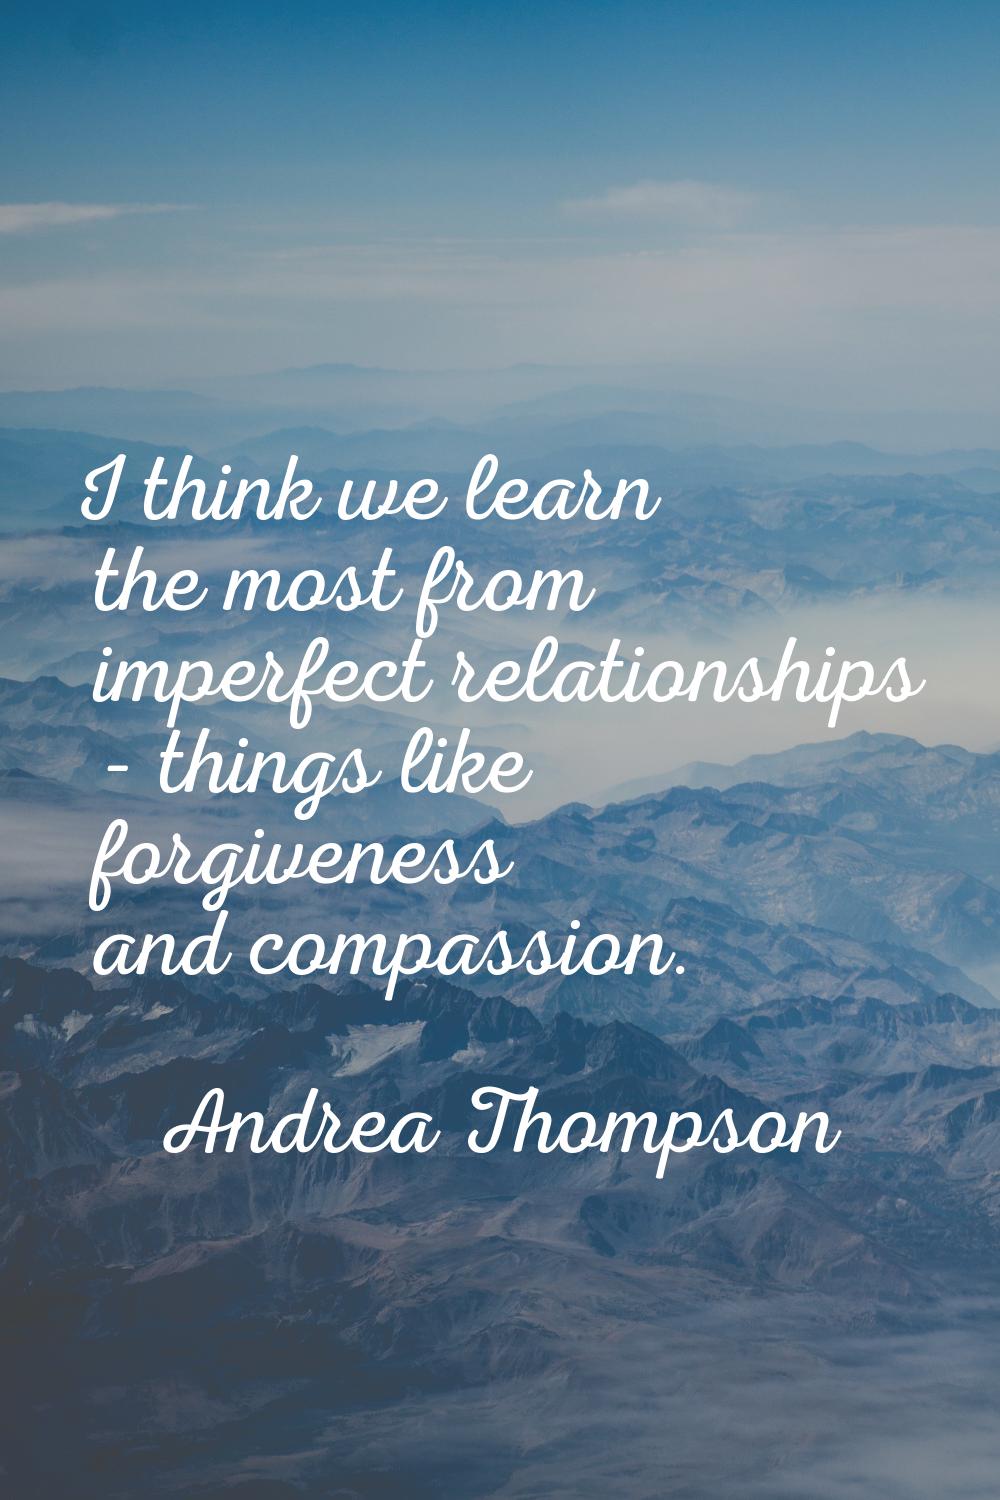 I think we learn the most from imperfect relationships - things like forgiveness and compassion.